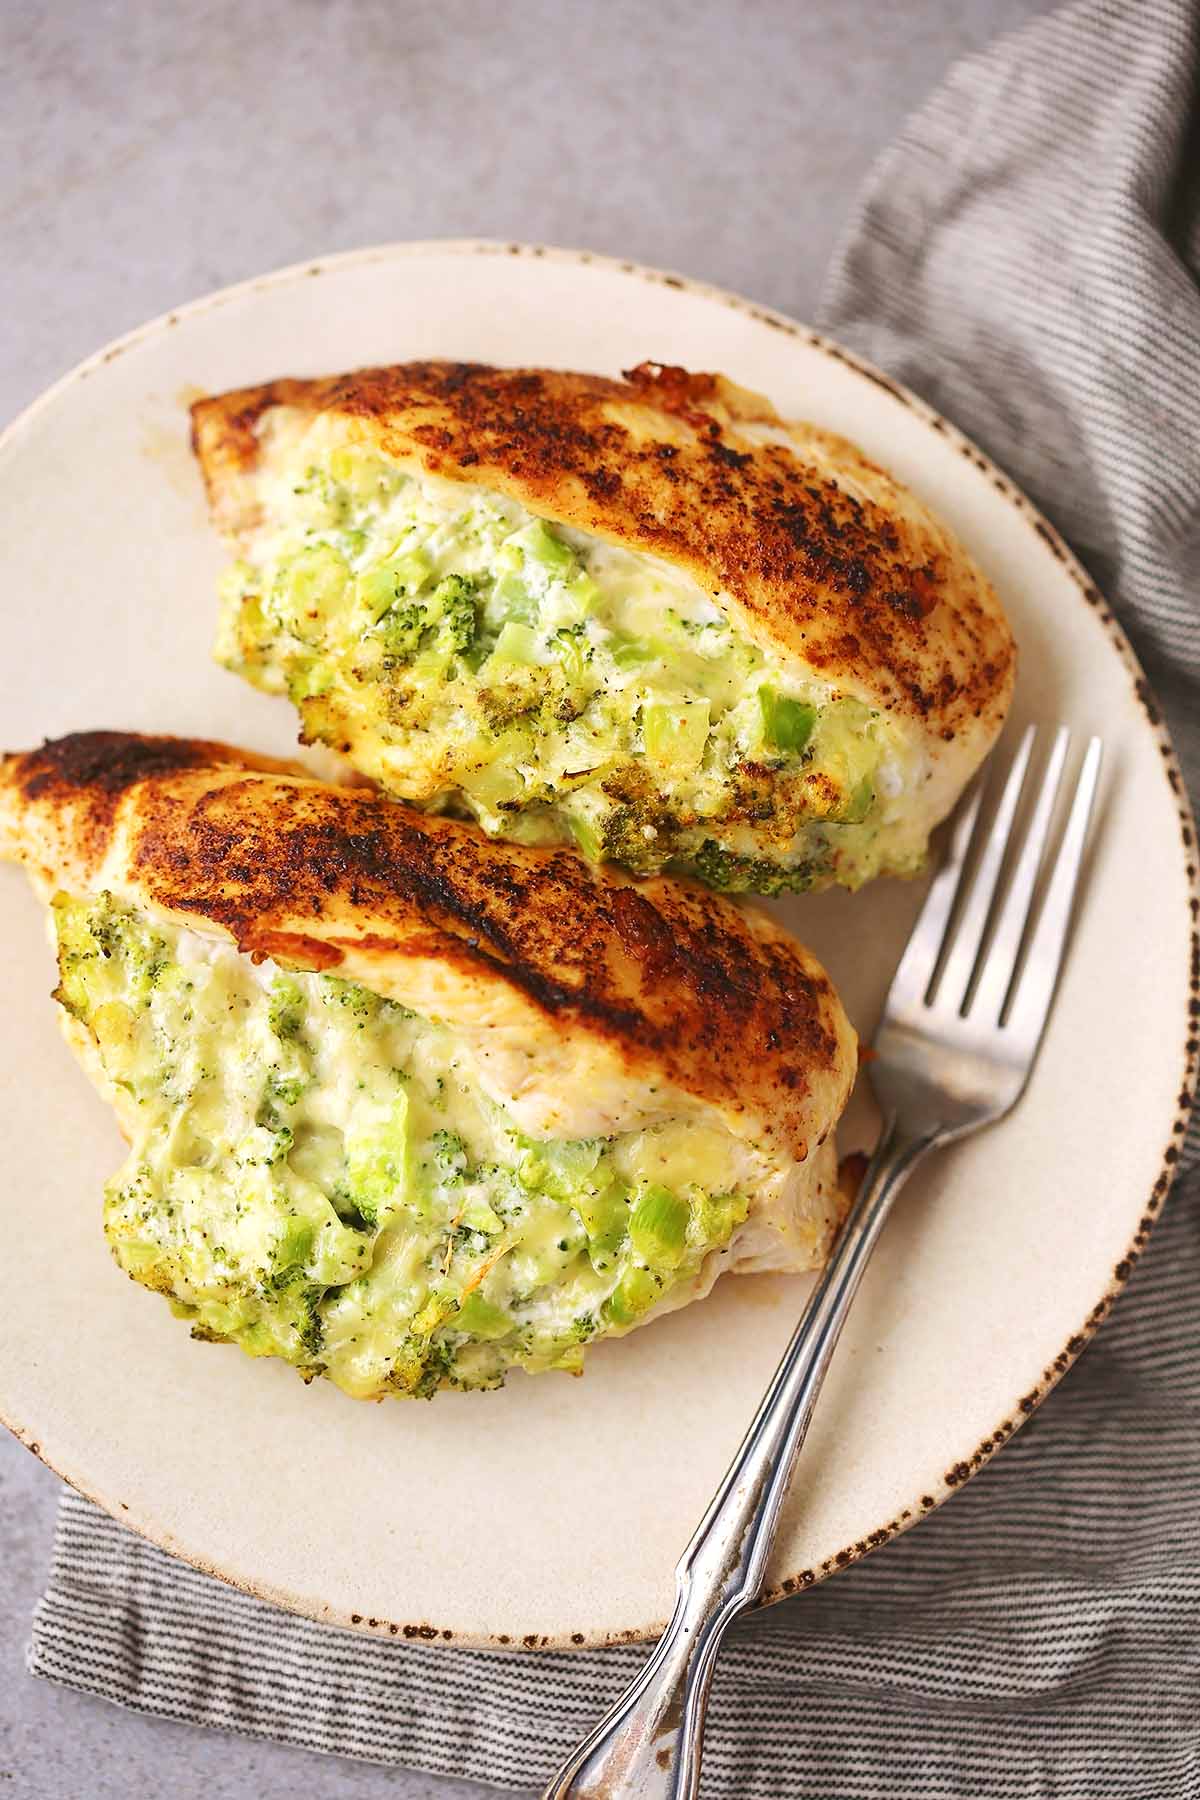 white serving plate with two cooked chicken breasts filled with melted cheese and broccoli filling